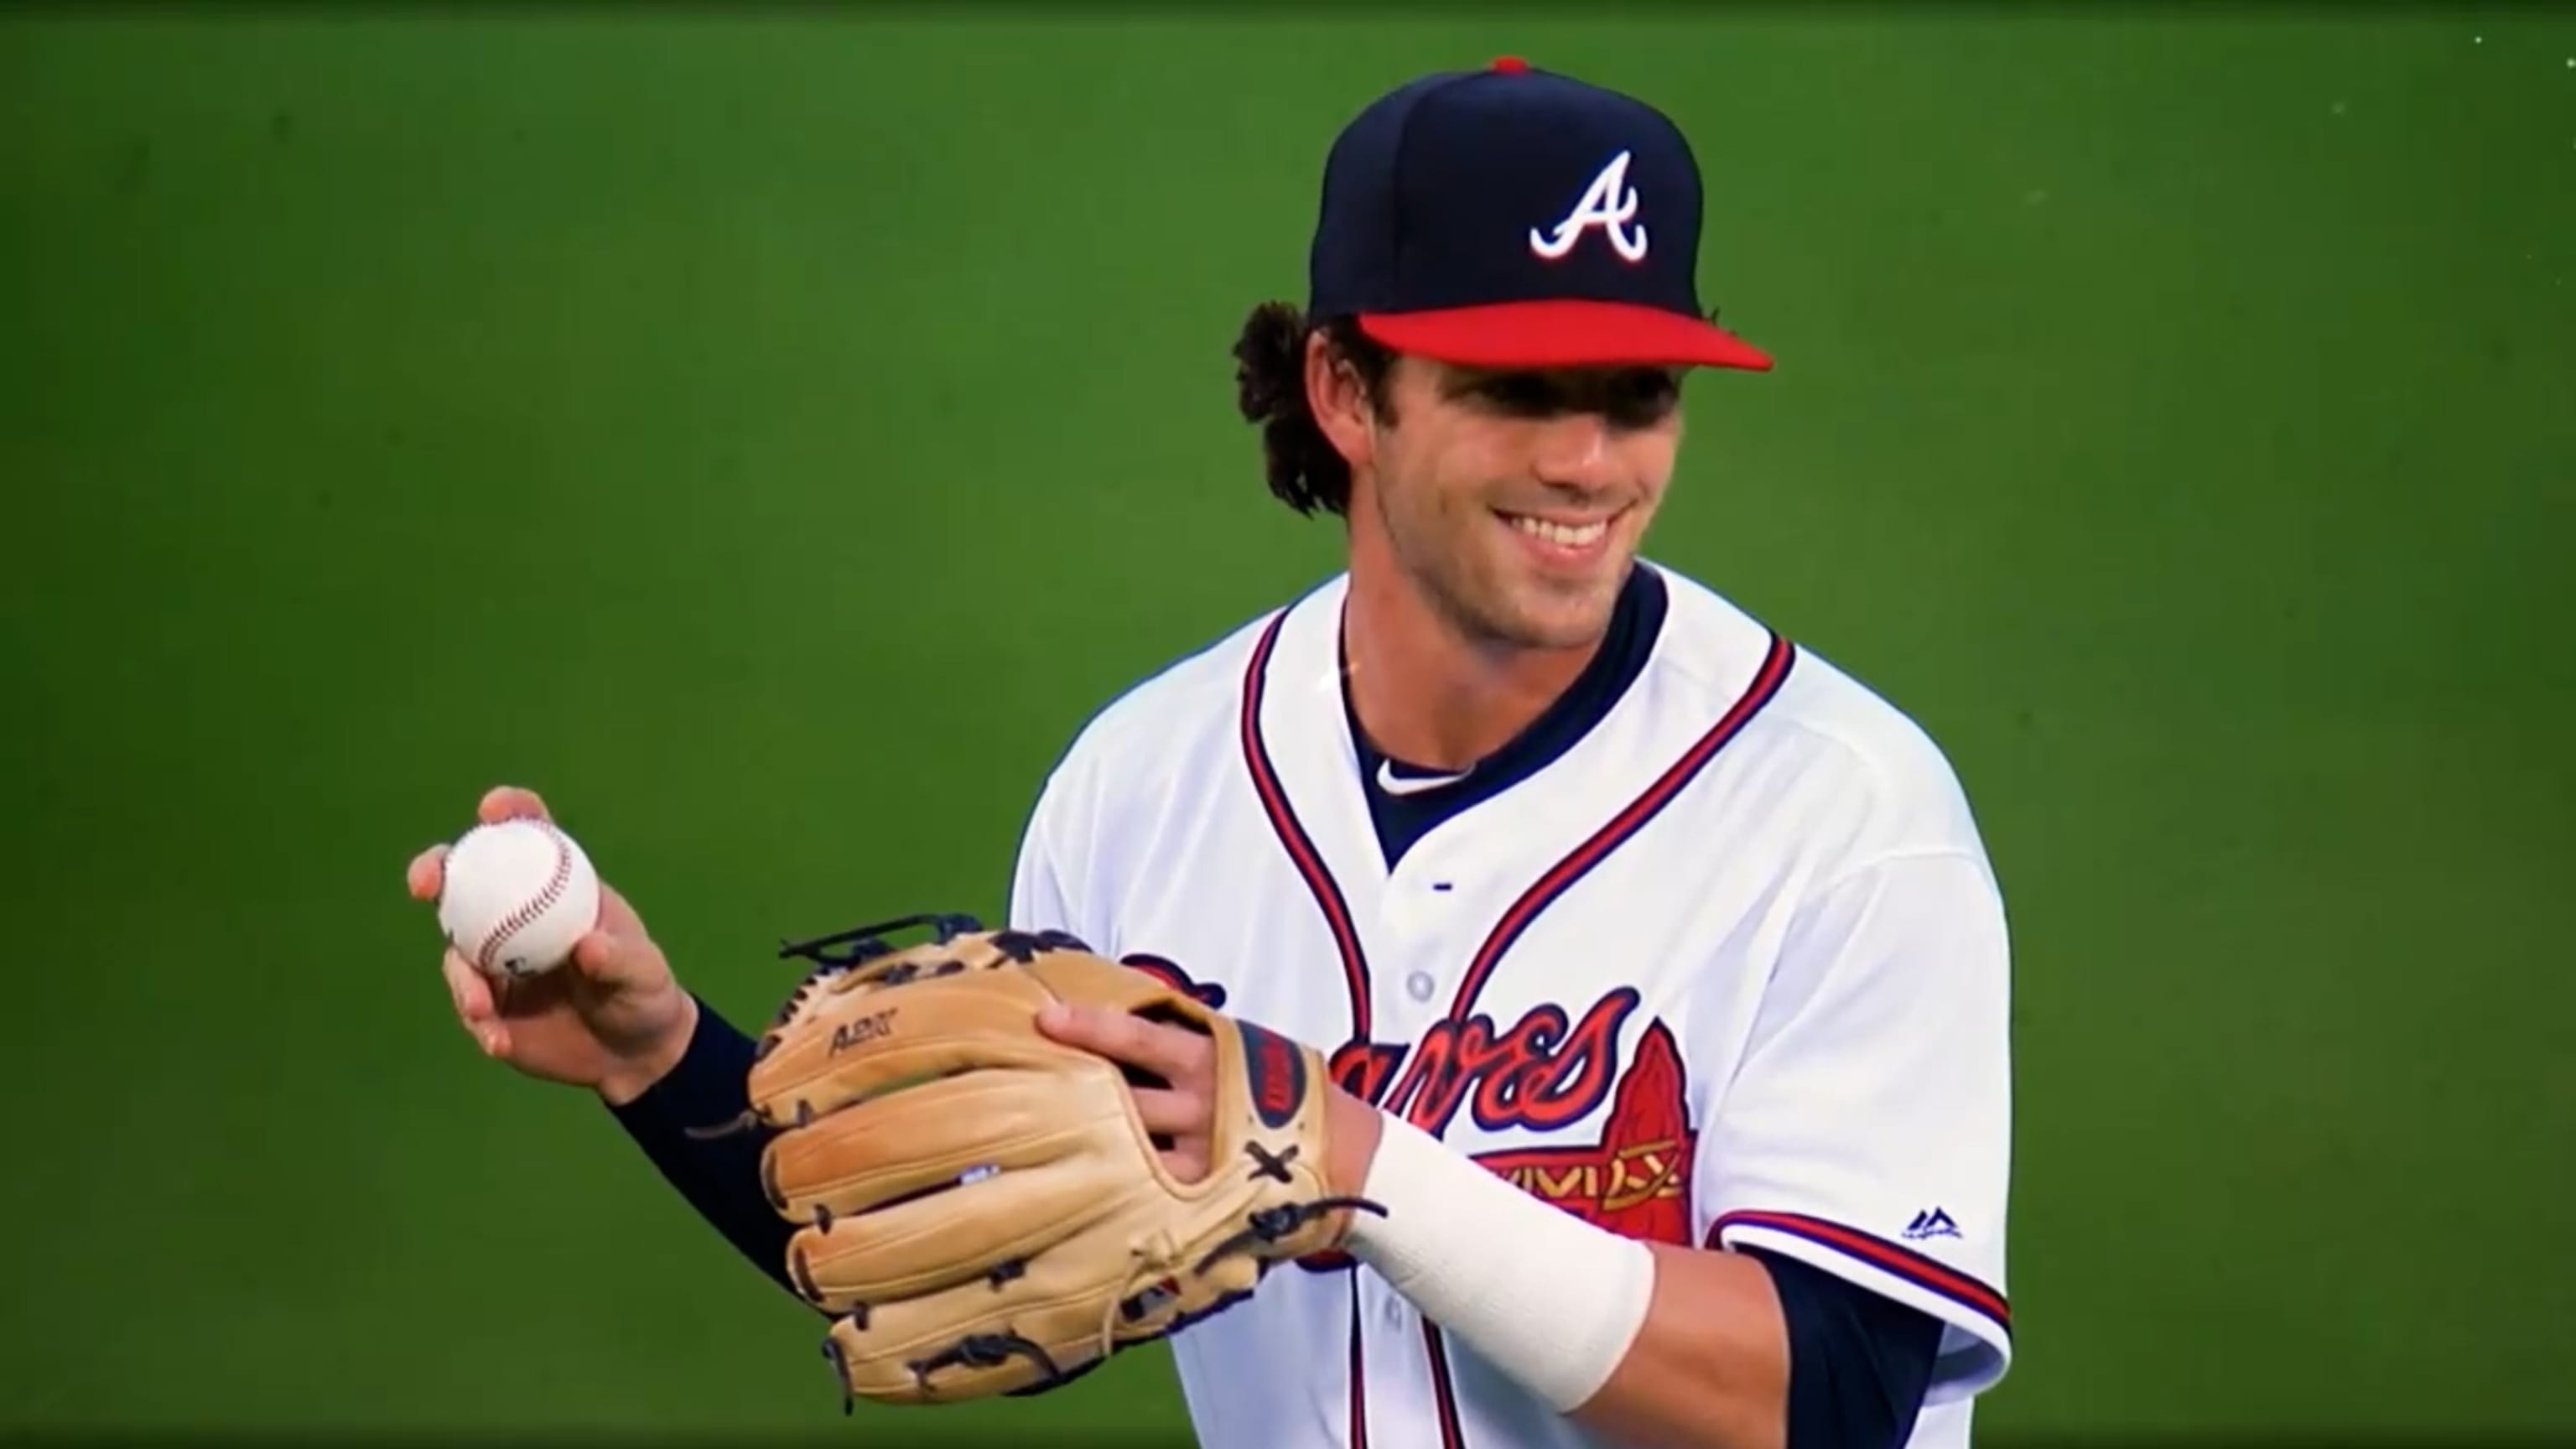 Atlanta Braves Shortstop Dansby Swanson looks on during the game